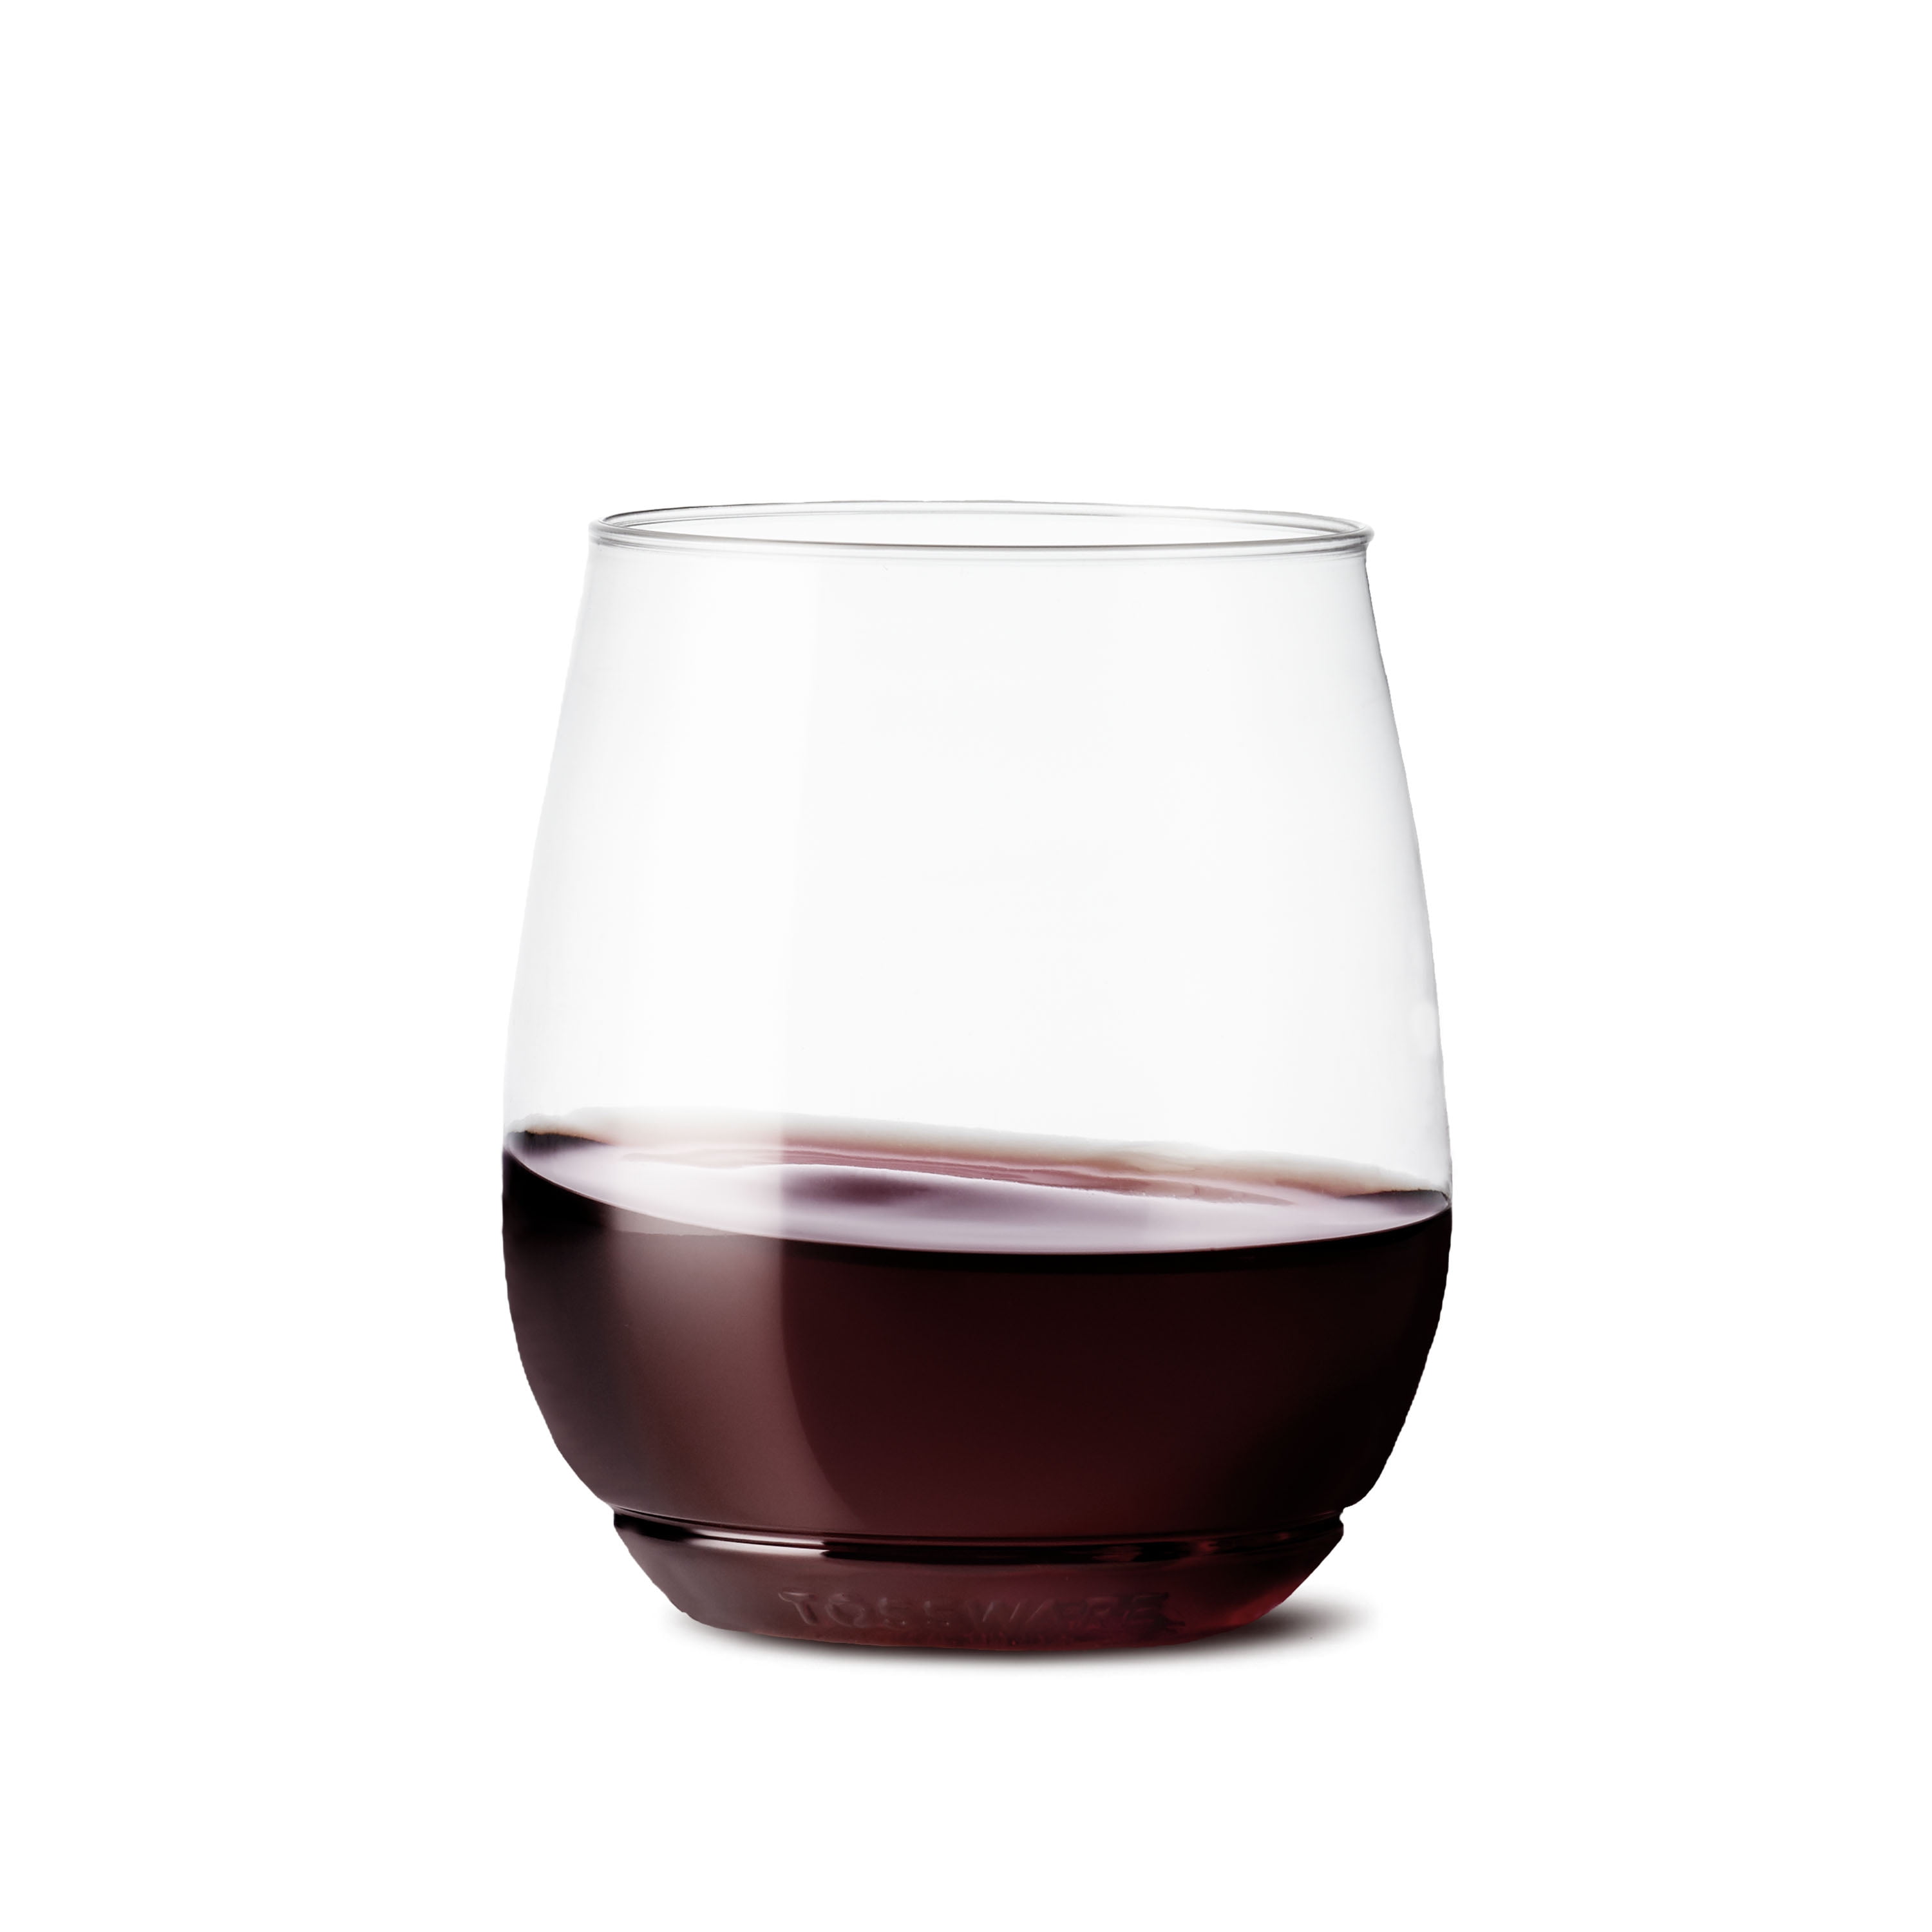 Stemless Wine Glasses Set Home Bar Drinking Glassware Cup Boxed Gift 15oz 12Pcs 